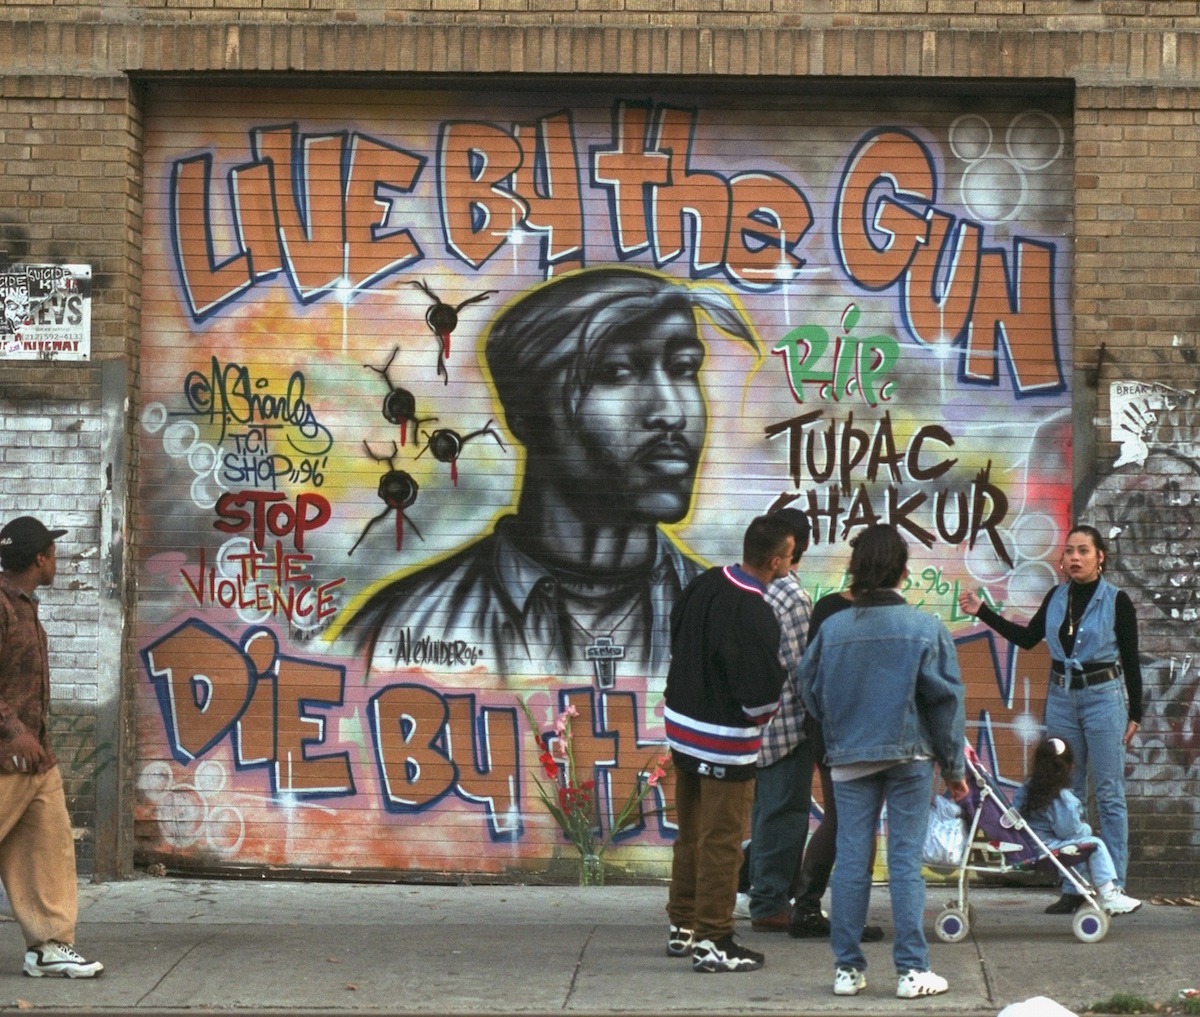 A memorial to the late Tupac Shakur on the Lower East Side.